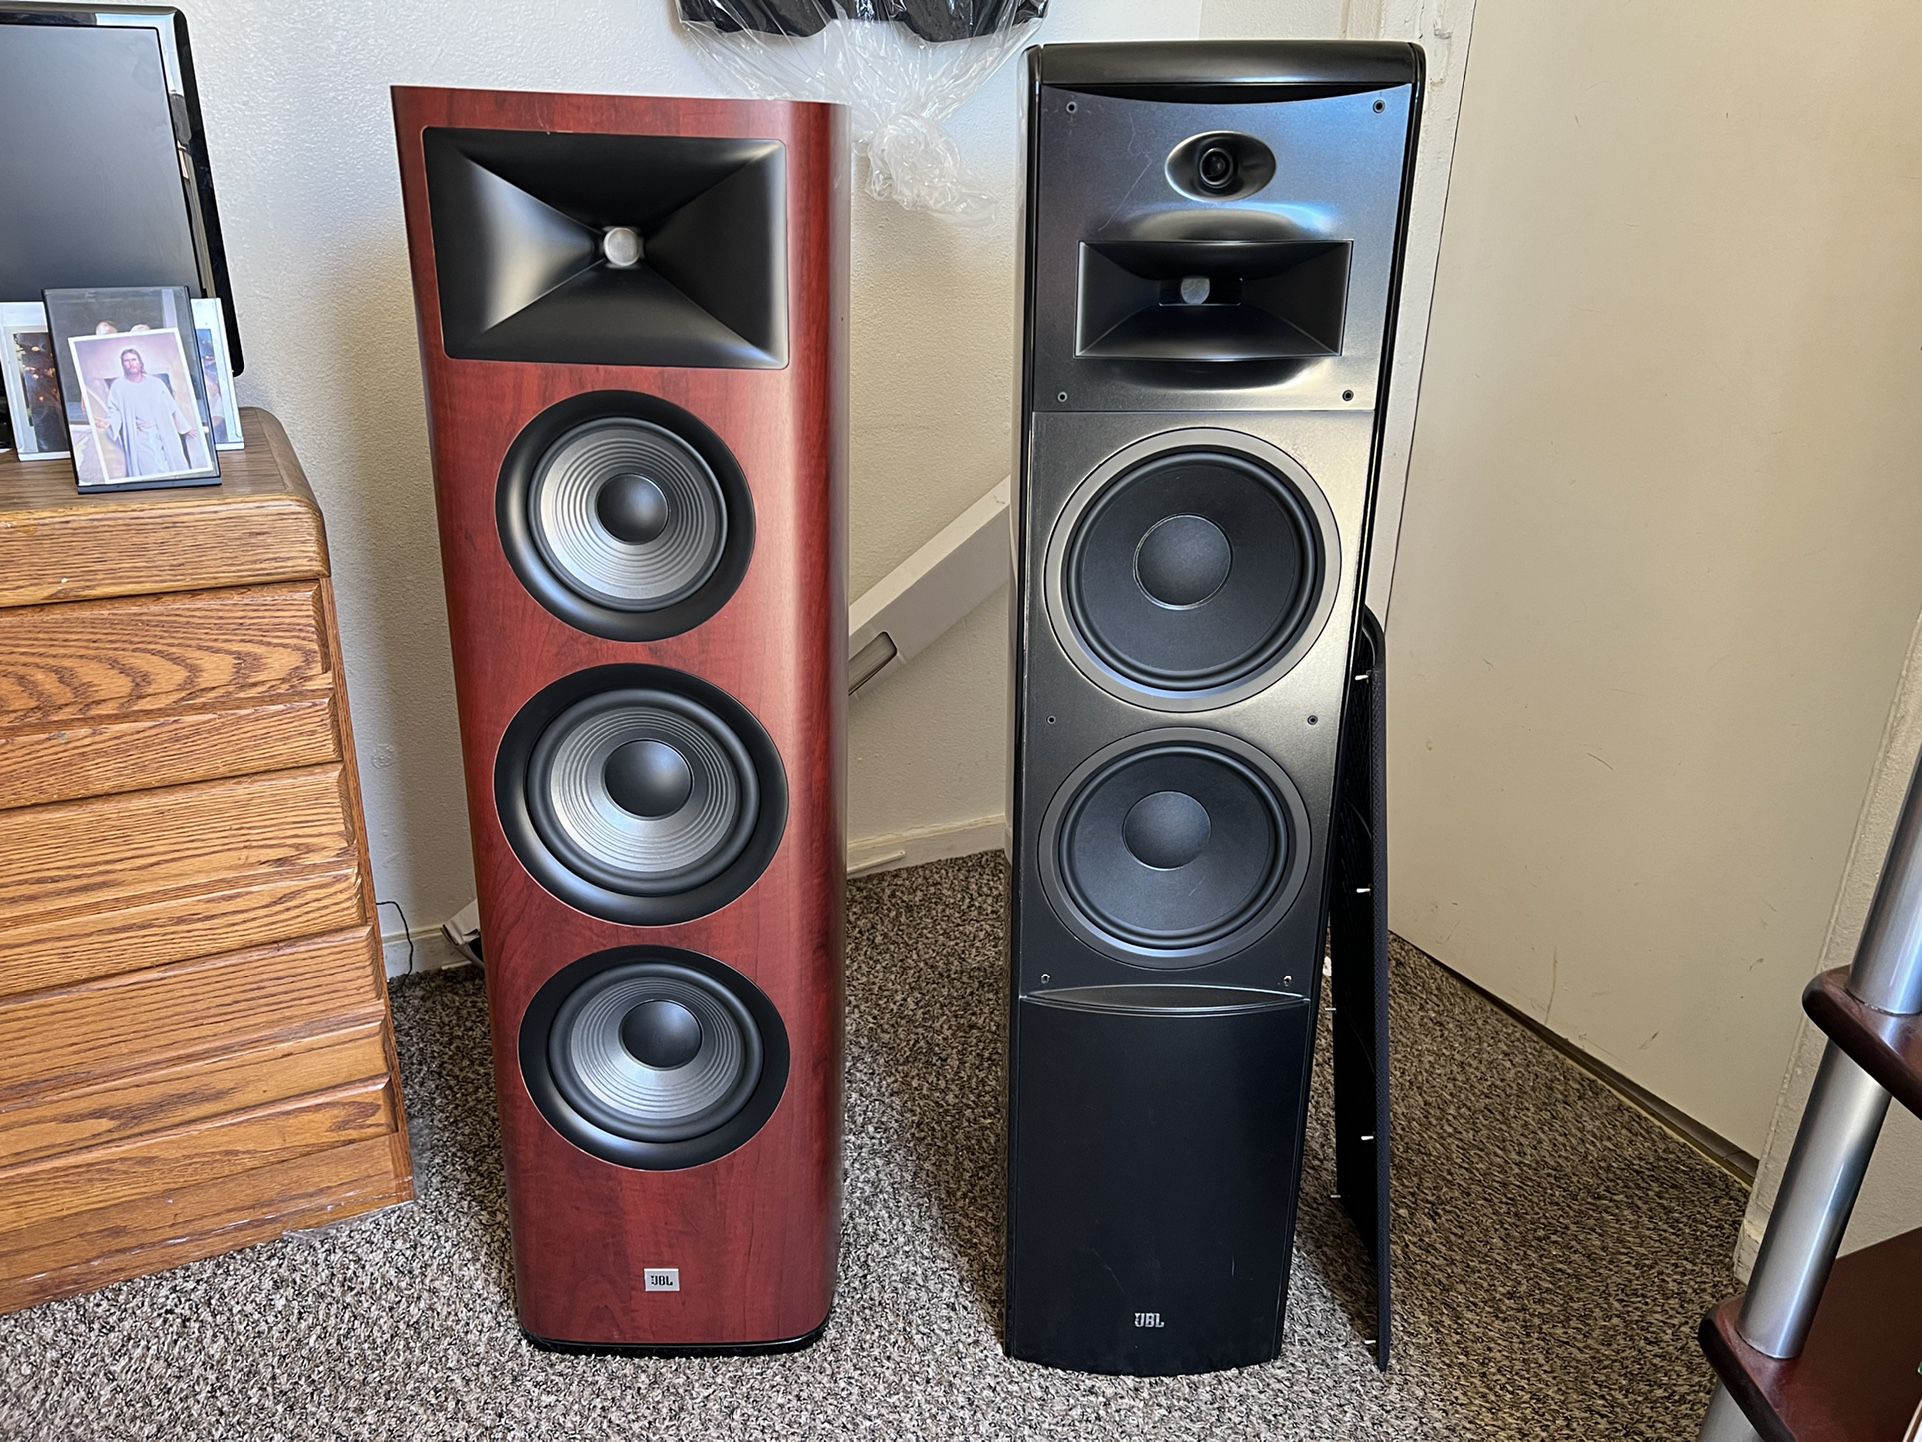 Jbl 698 And Ls80 for Sale in Habra Heights, CA - OfferUp